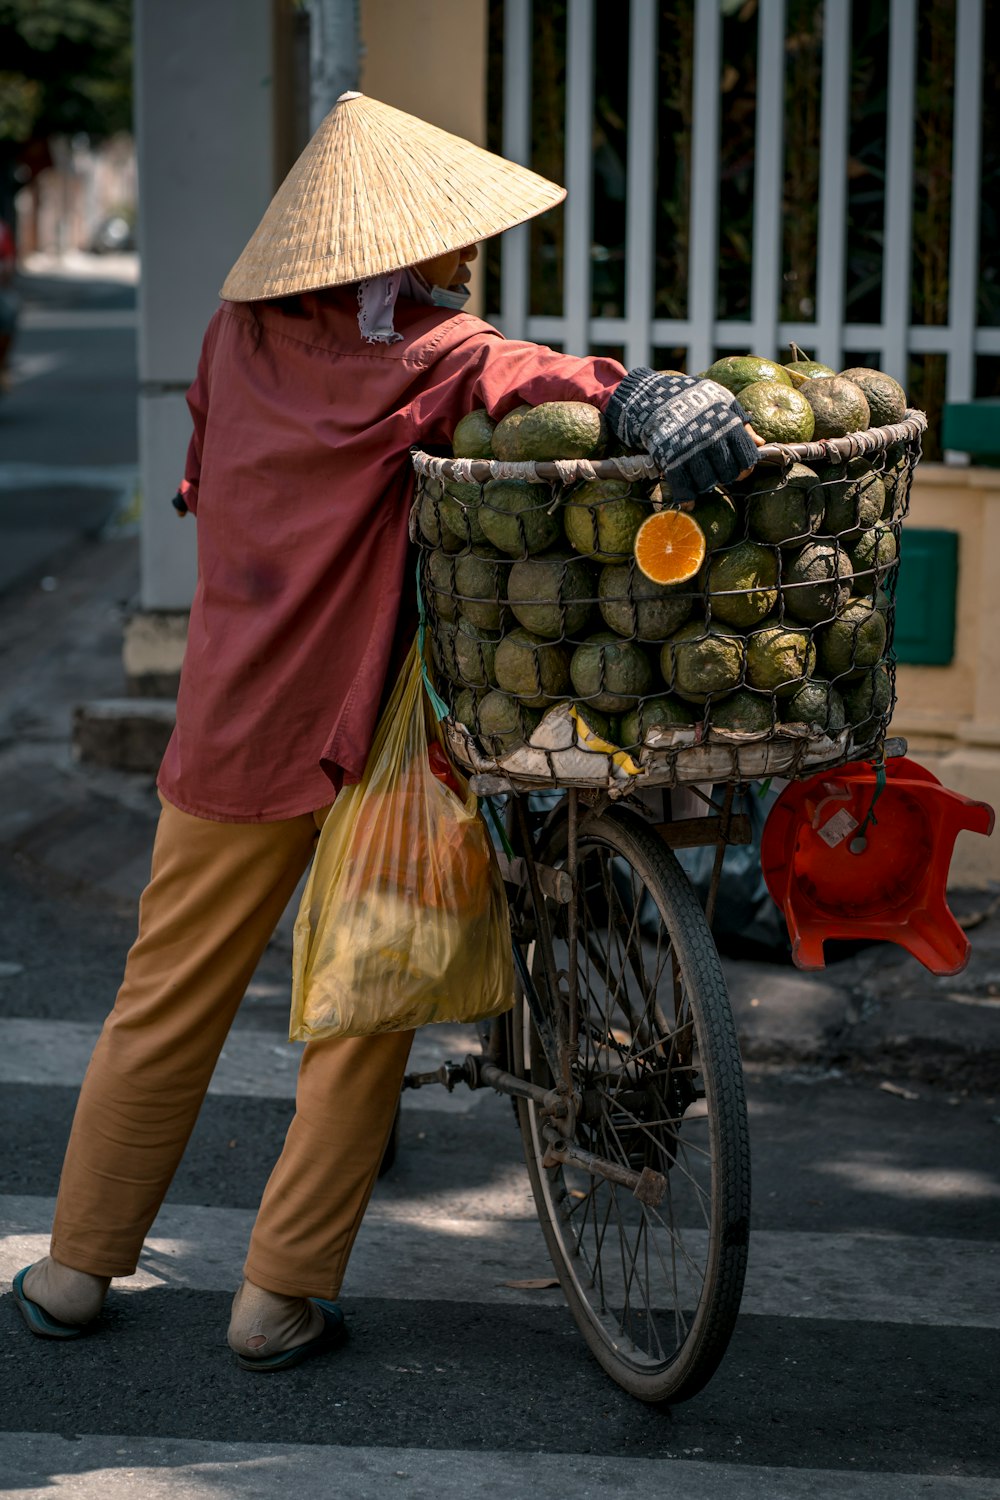 a person on a bike with a basket of fruit